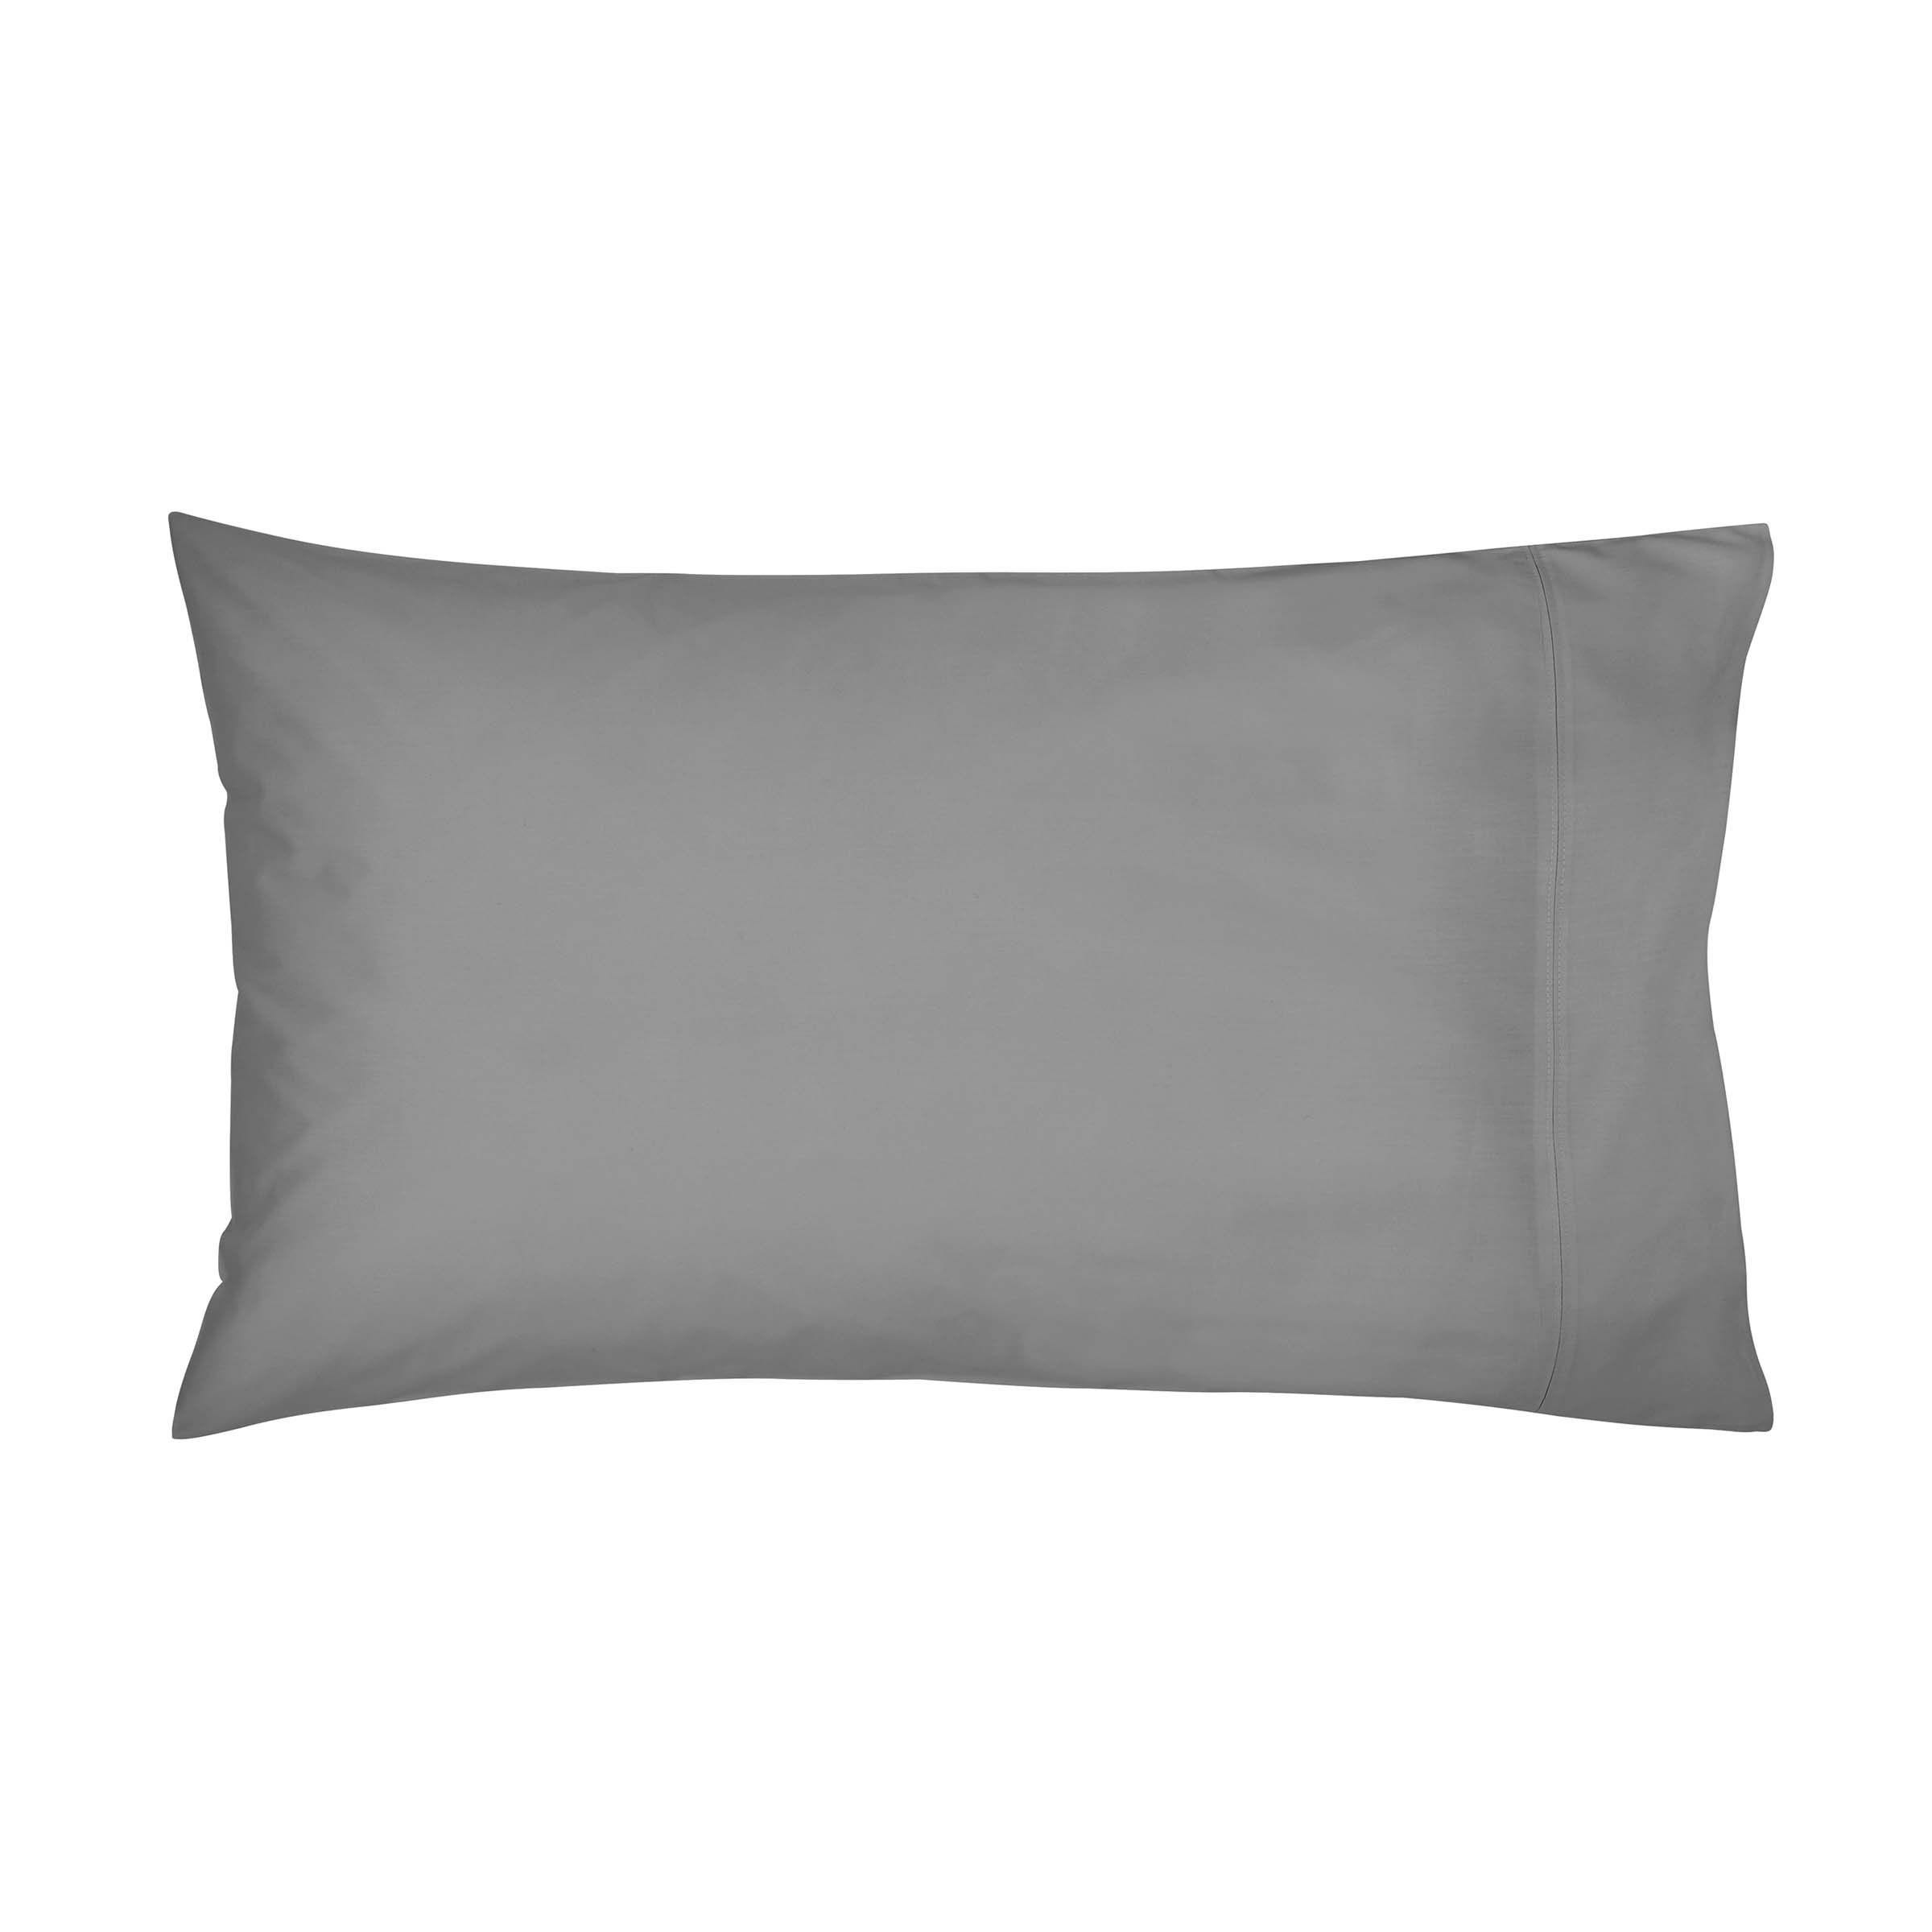 300 Thread Count Egyptian Cotton Housewife Pillowcase Charcoal